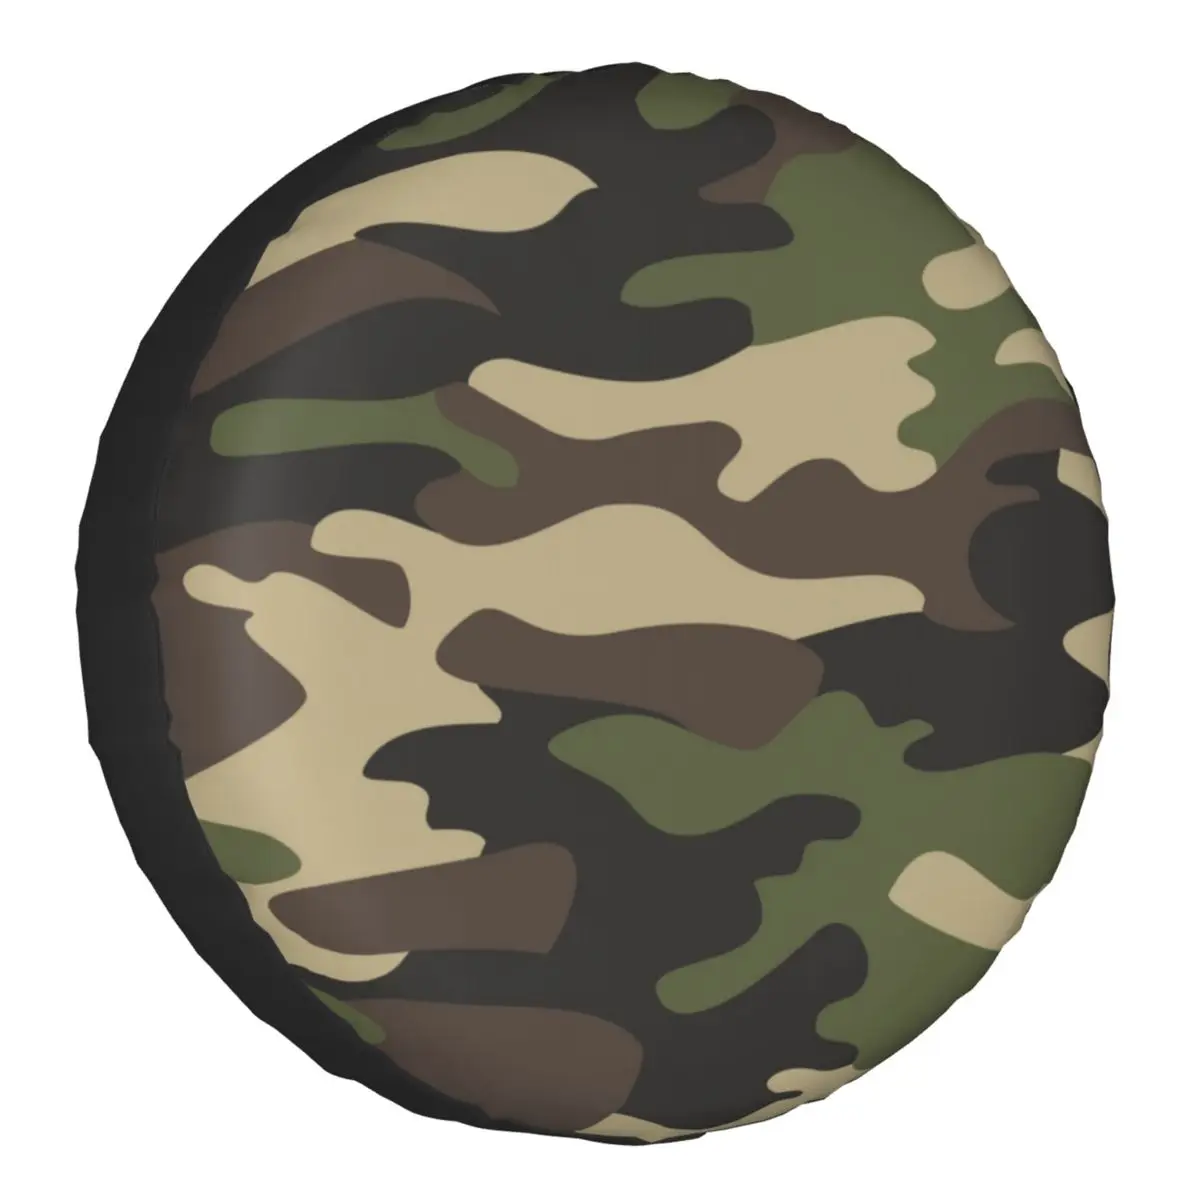 

Green Brown Military Camouflage Spare Wheel Tire Cover for Toyota Land Cruiser Prado Army Jungle Camo Jeep RV SUV 4WD Vehicle